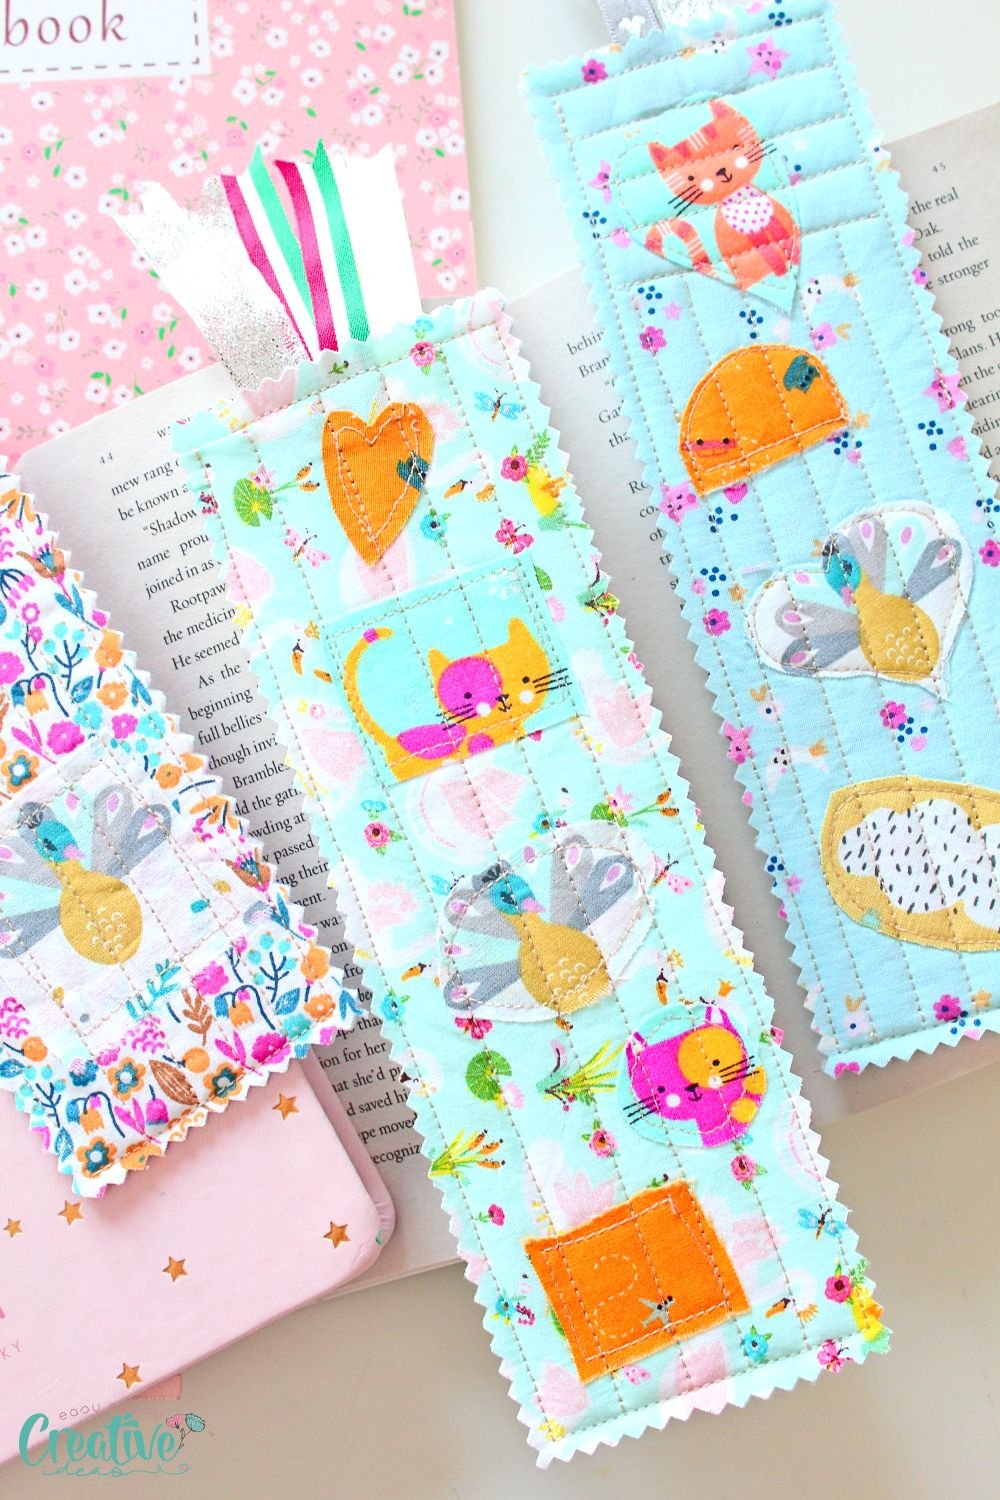 Scrappy bookmarks